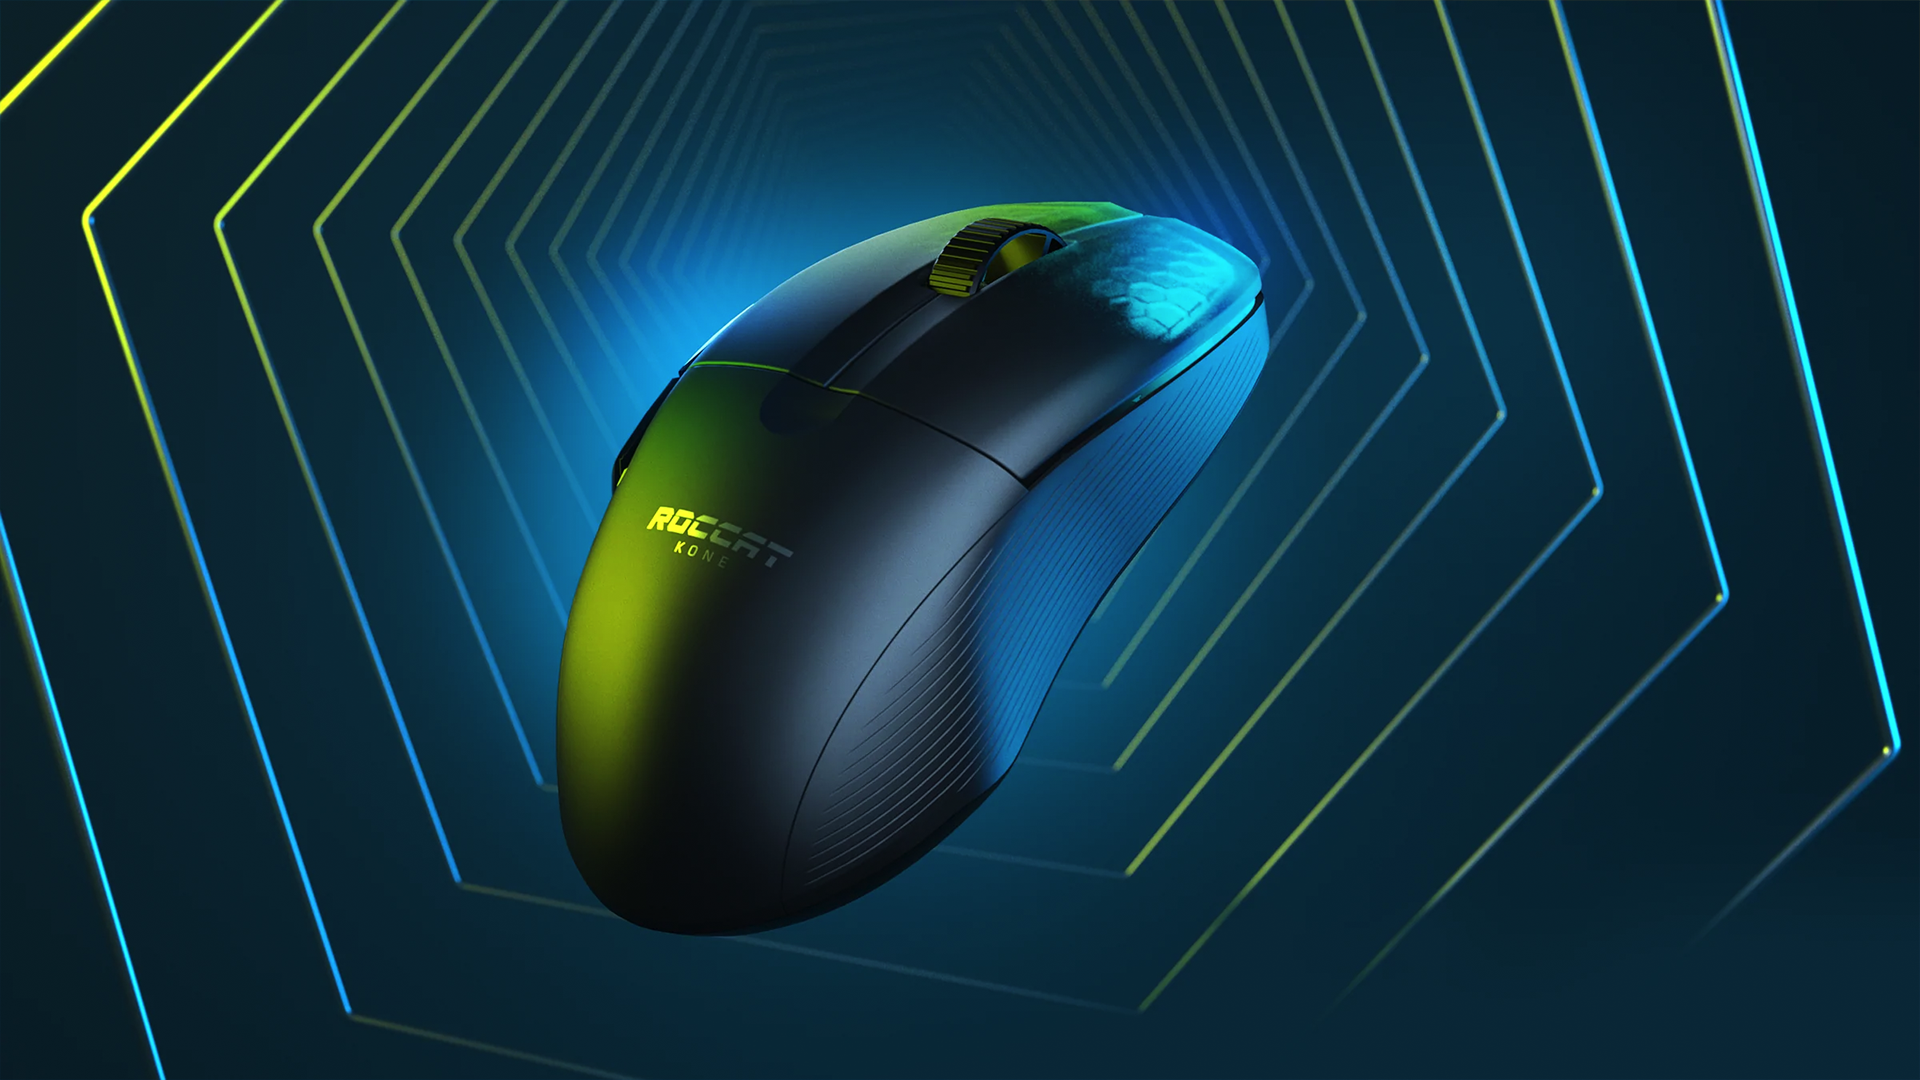 The ROCCAT Kone Pro Air mouse on a flashy blue background.